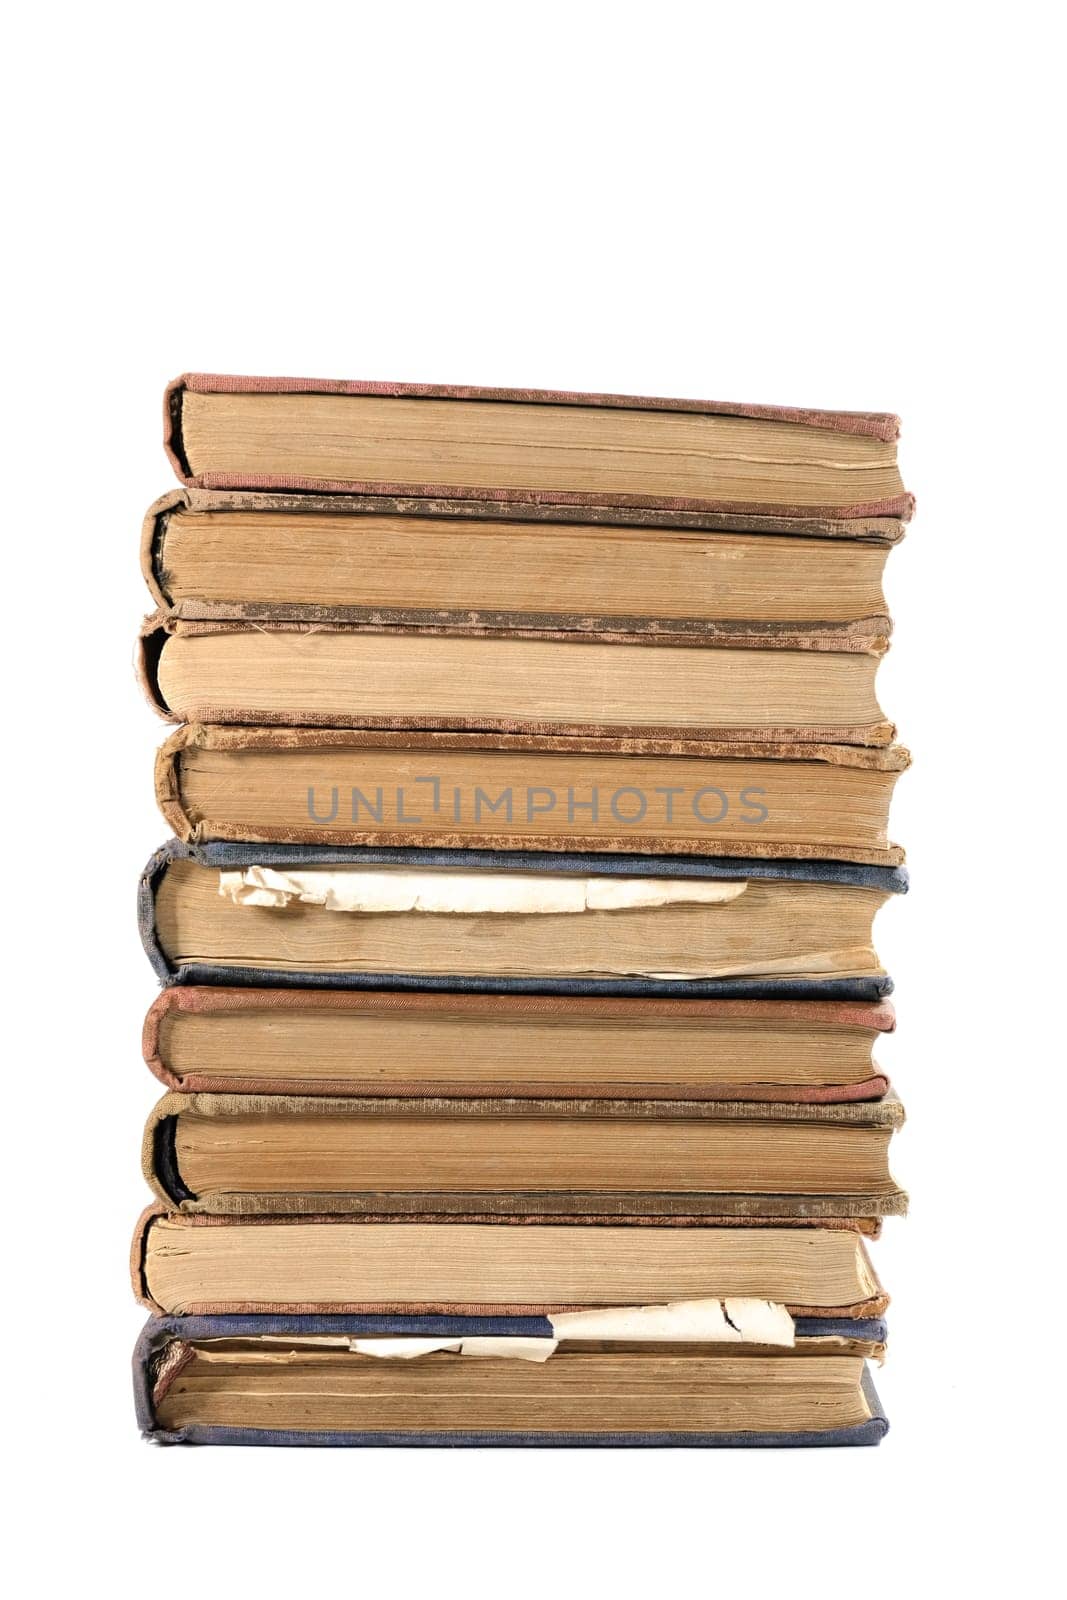 A stack of old books isolated on a white background by Shablovskyistock